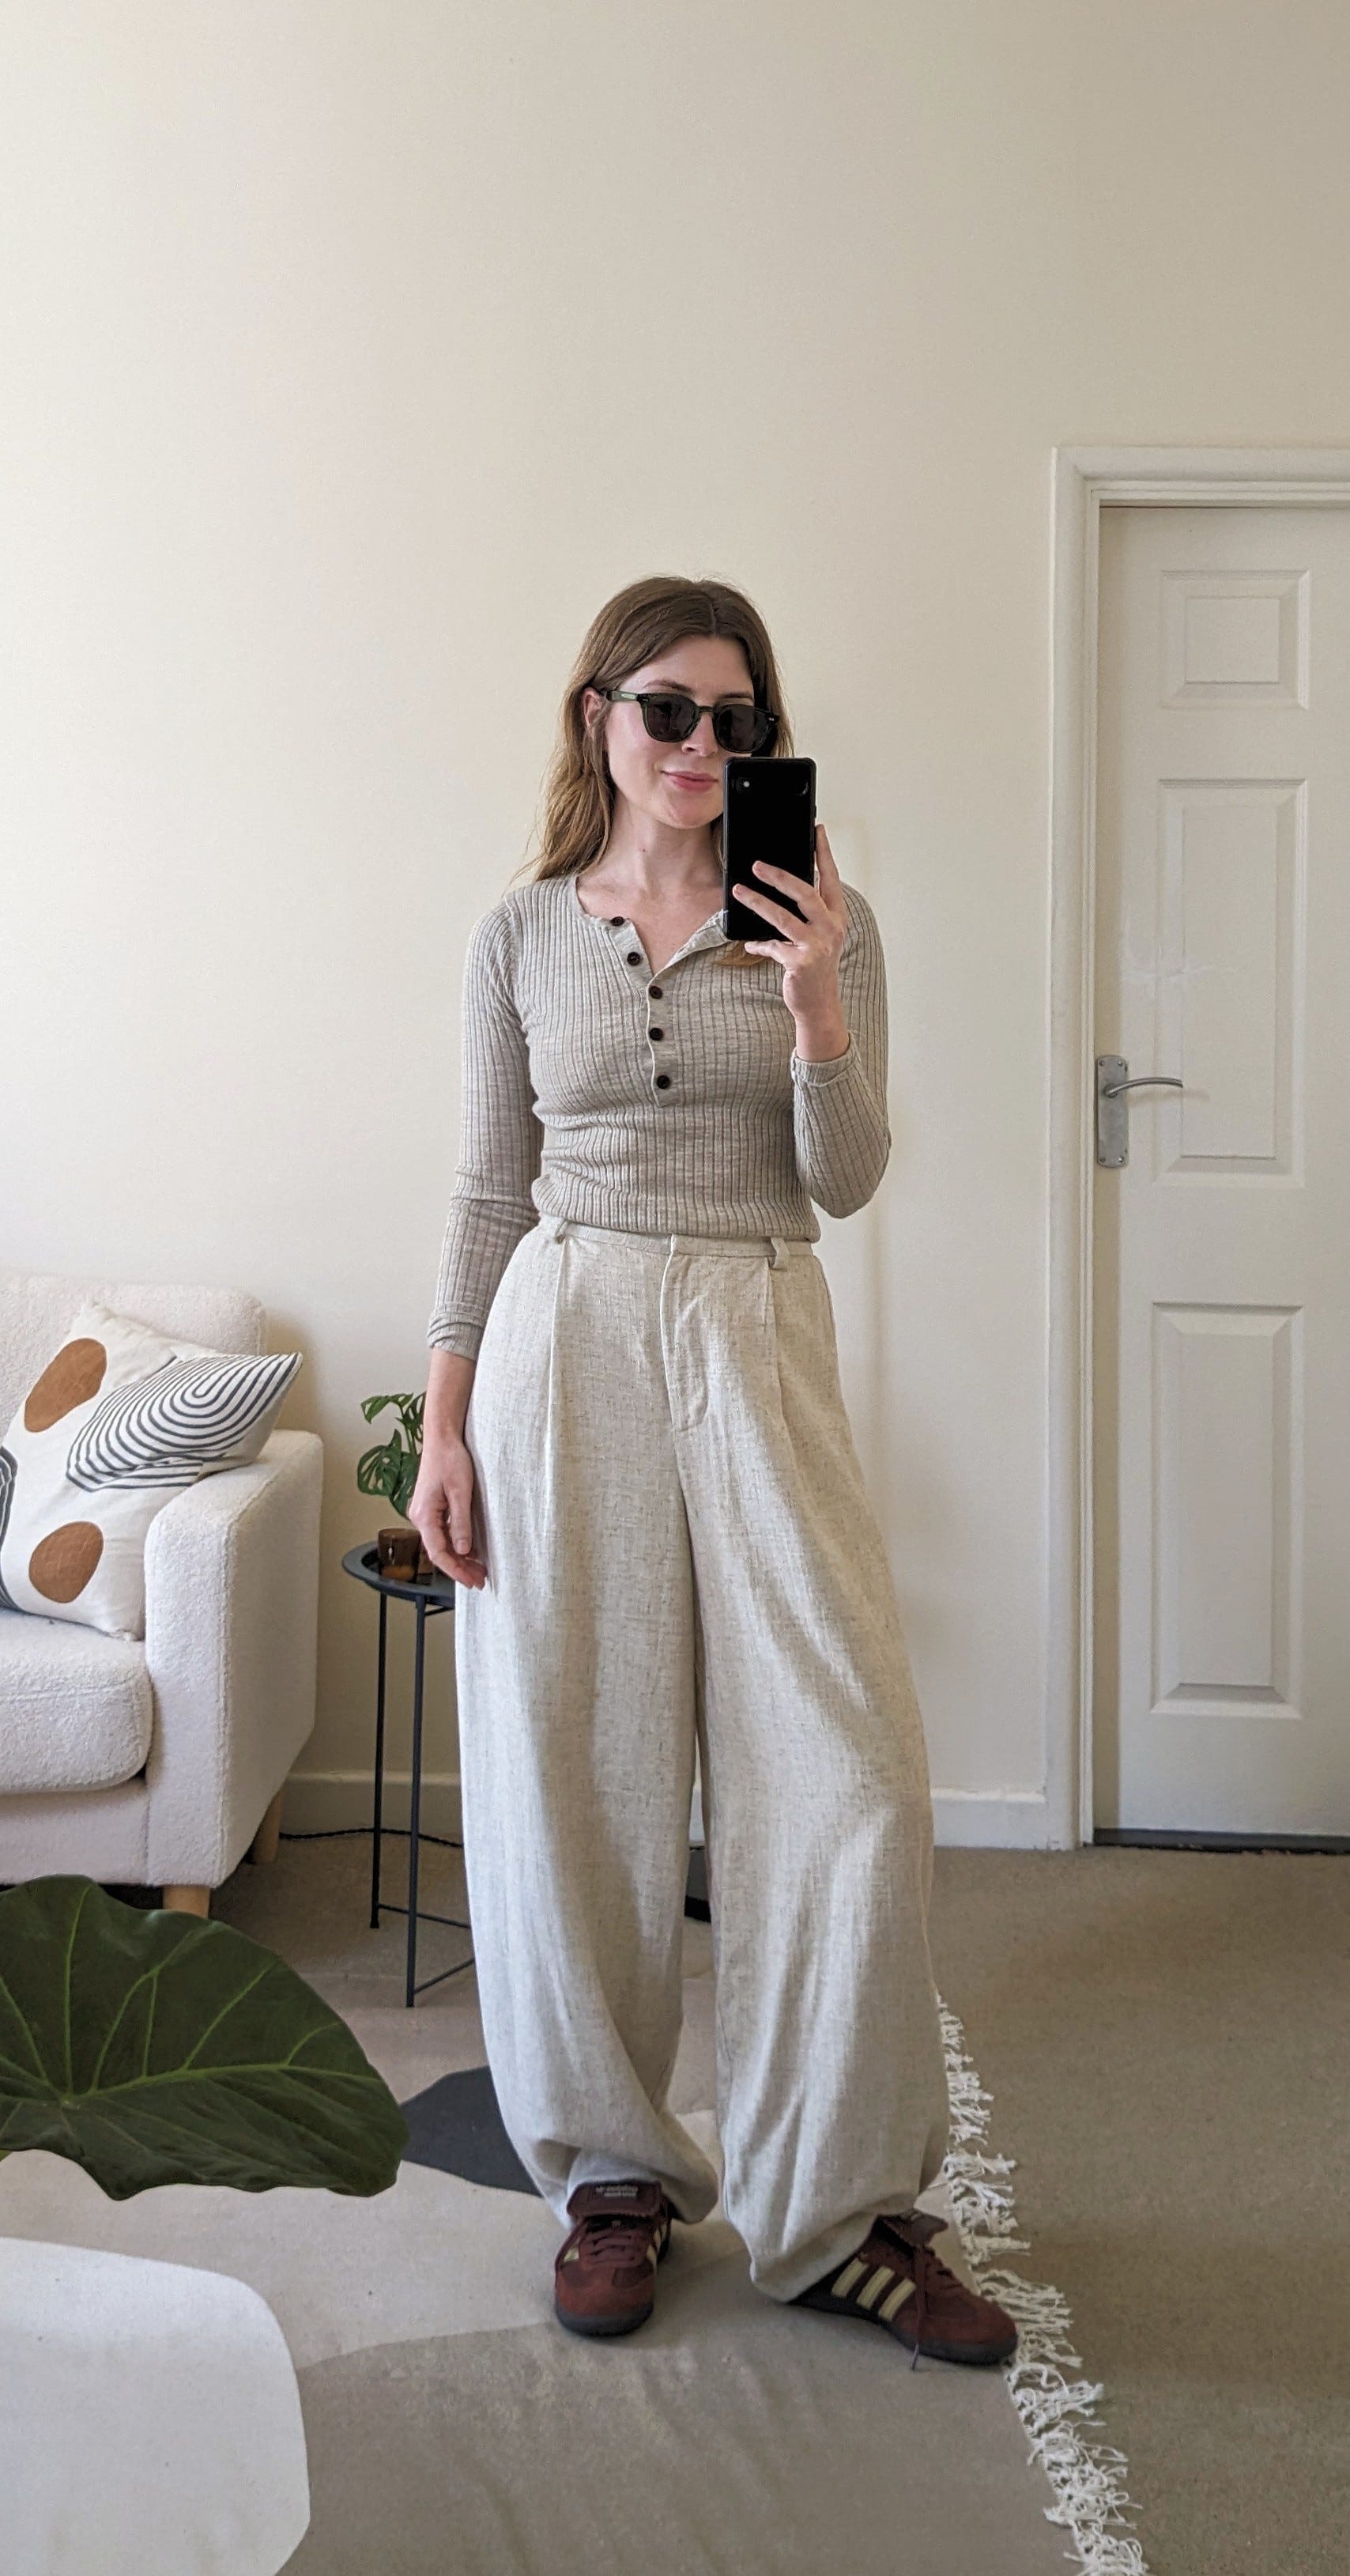 How to Wear Trainers with Tailoring - by Angharad Jones